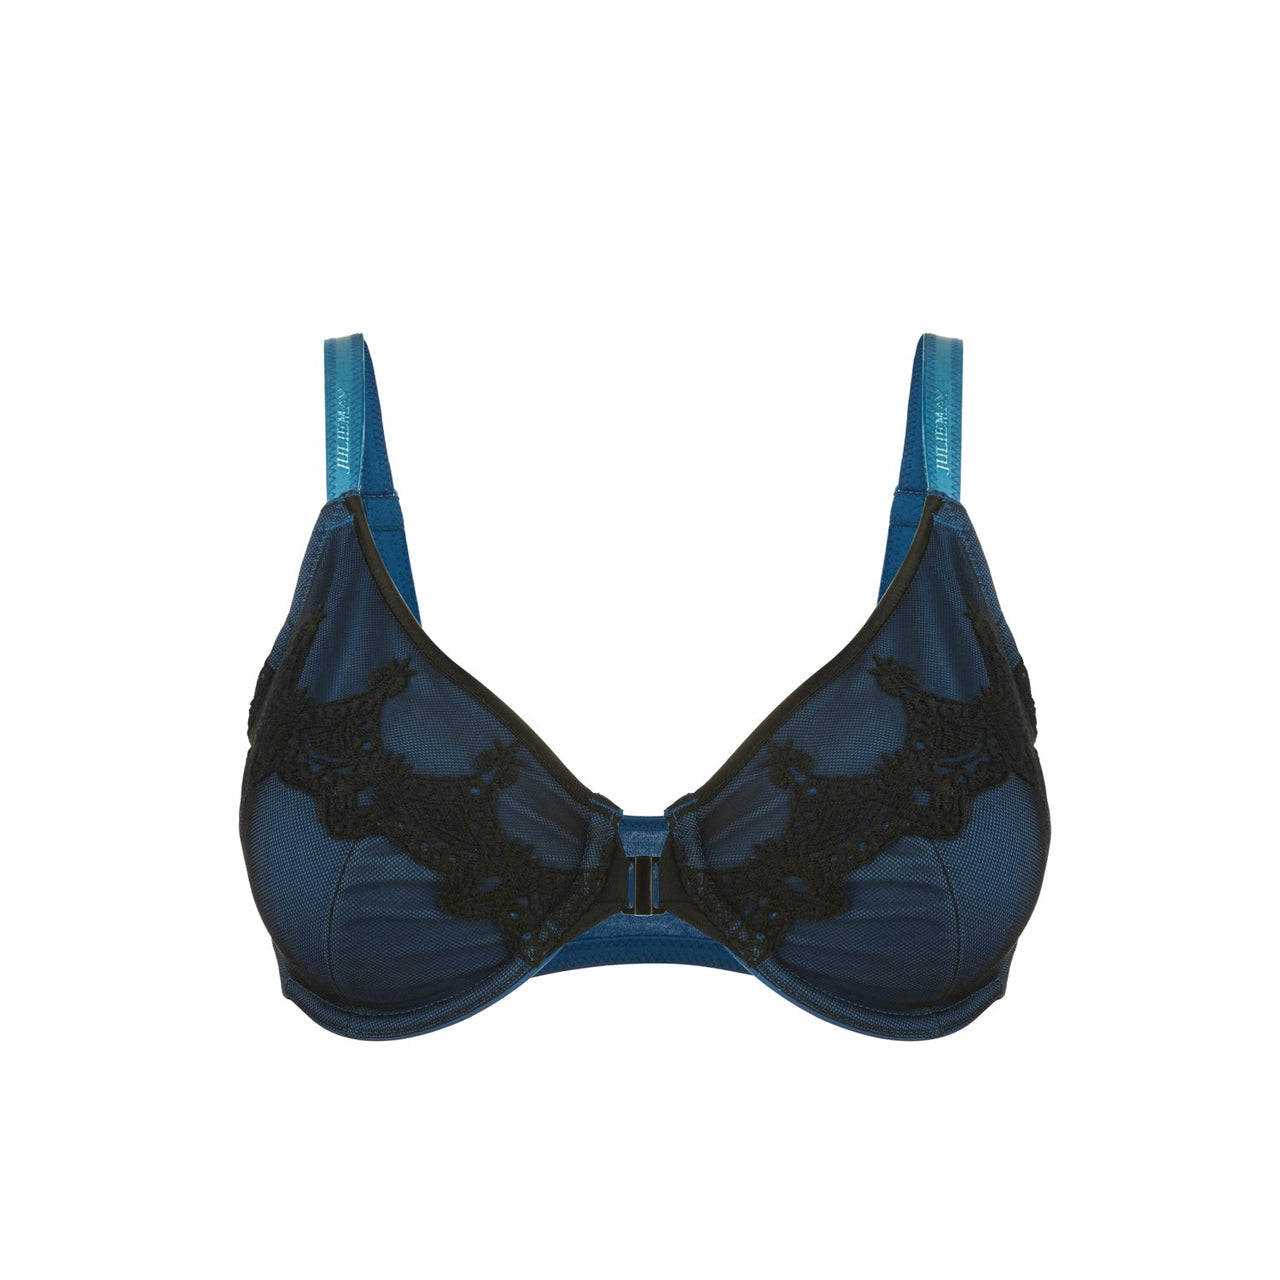 Elysia - Navy Blue Silk & Organic Cotton Front Closure Full Cup Underwired Bra-0